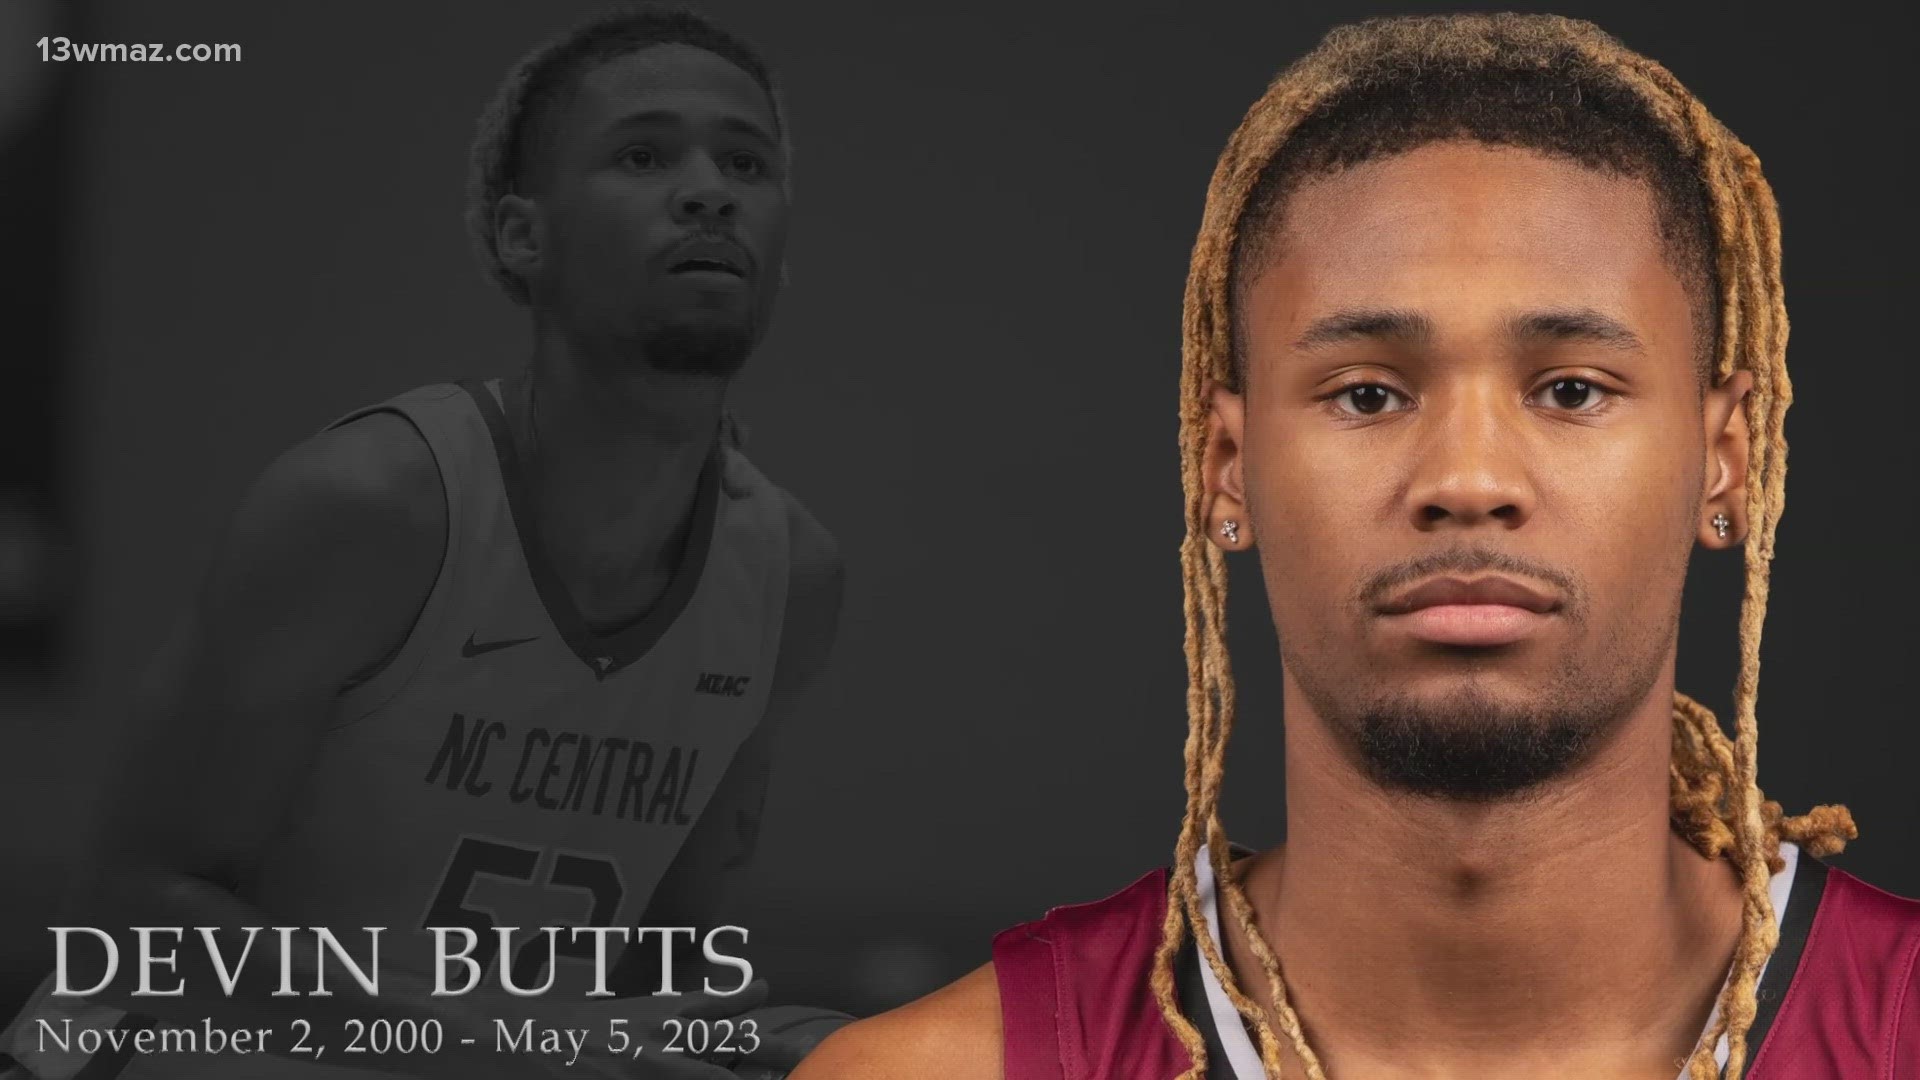 North Carolina Central University posted a tribute to Devin Butts, who passed away on Friday, May 5.